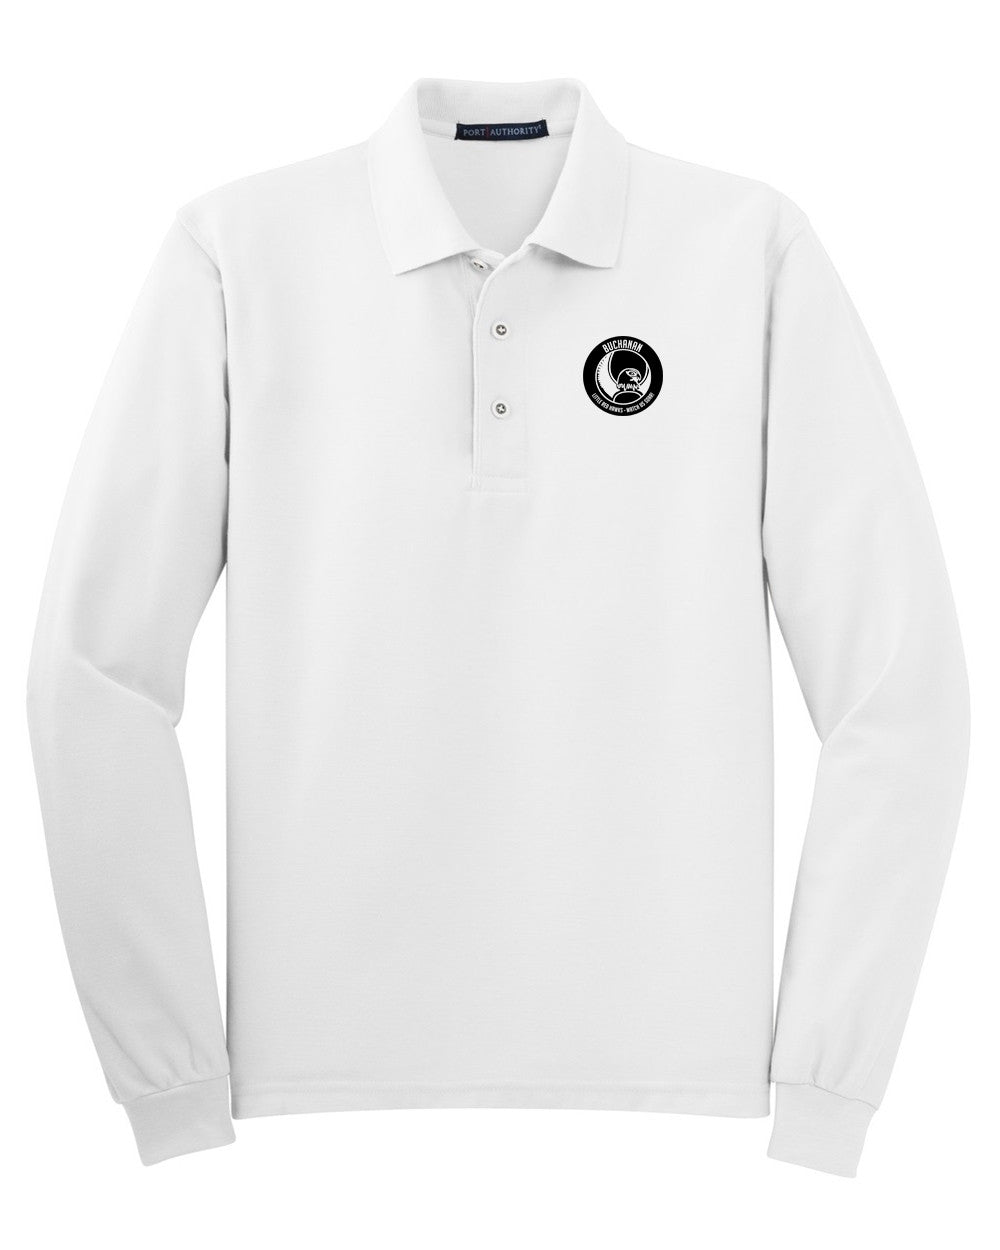 South West Community Campus Long Sleeve Polo